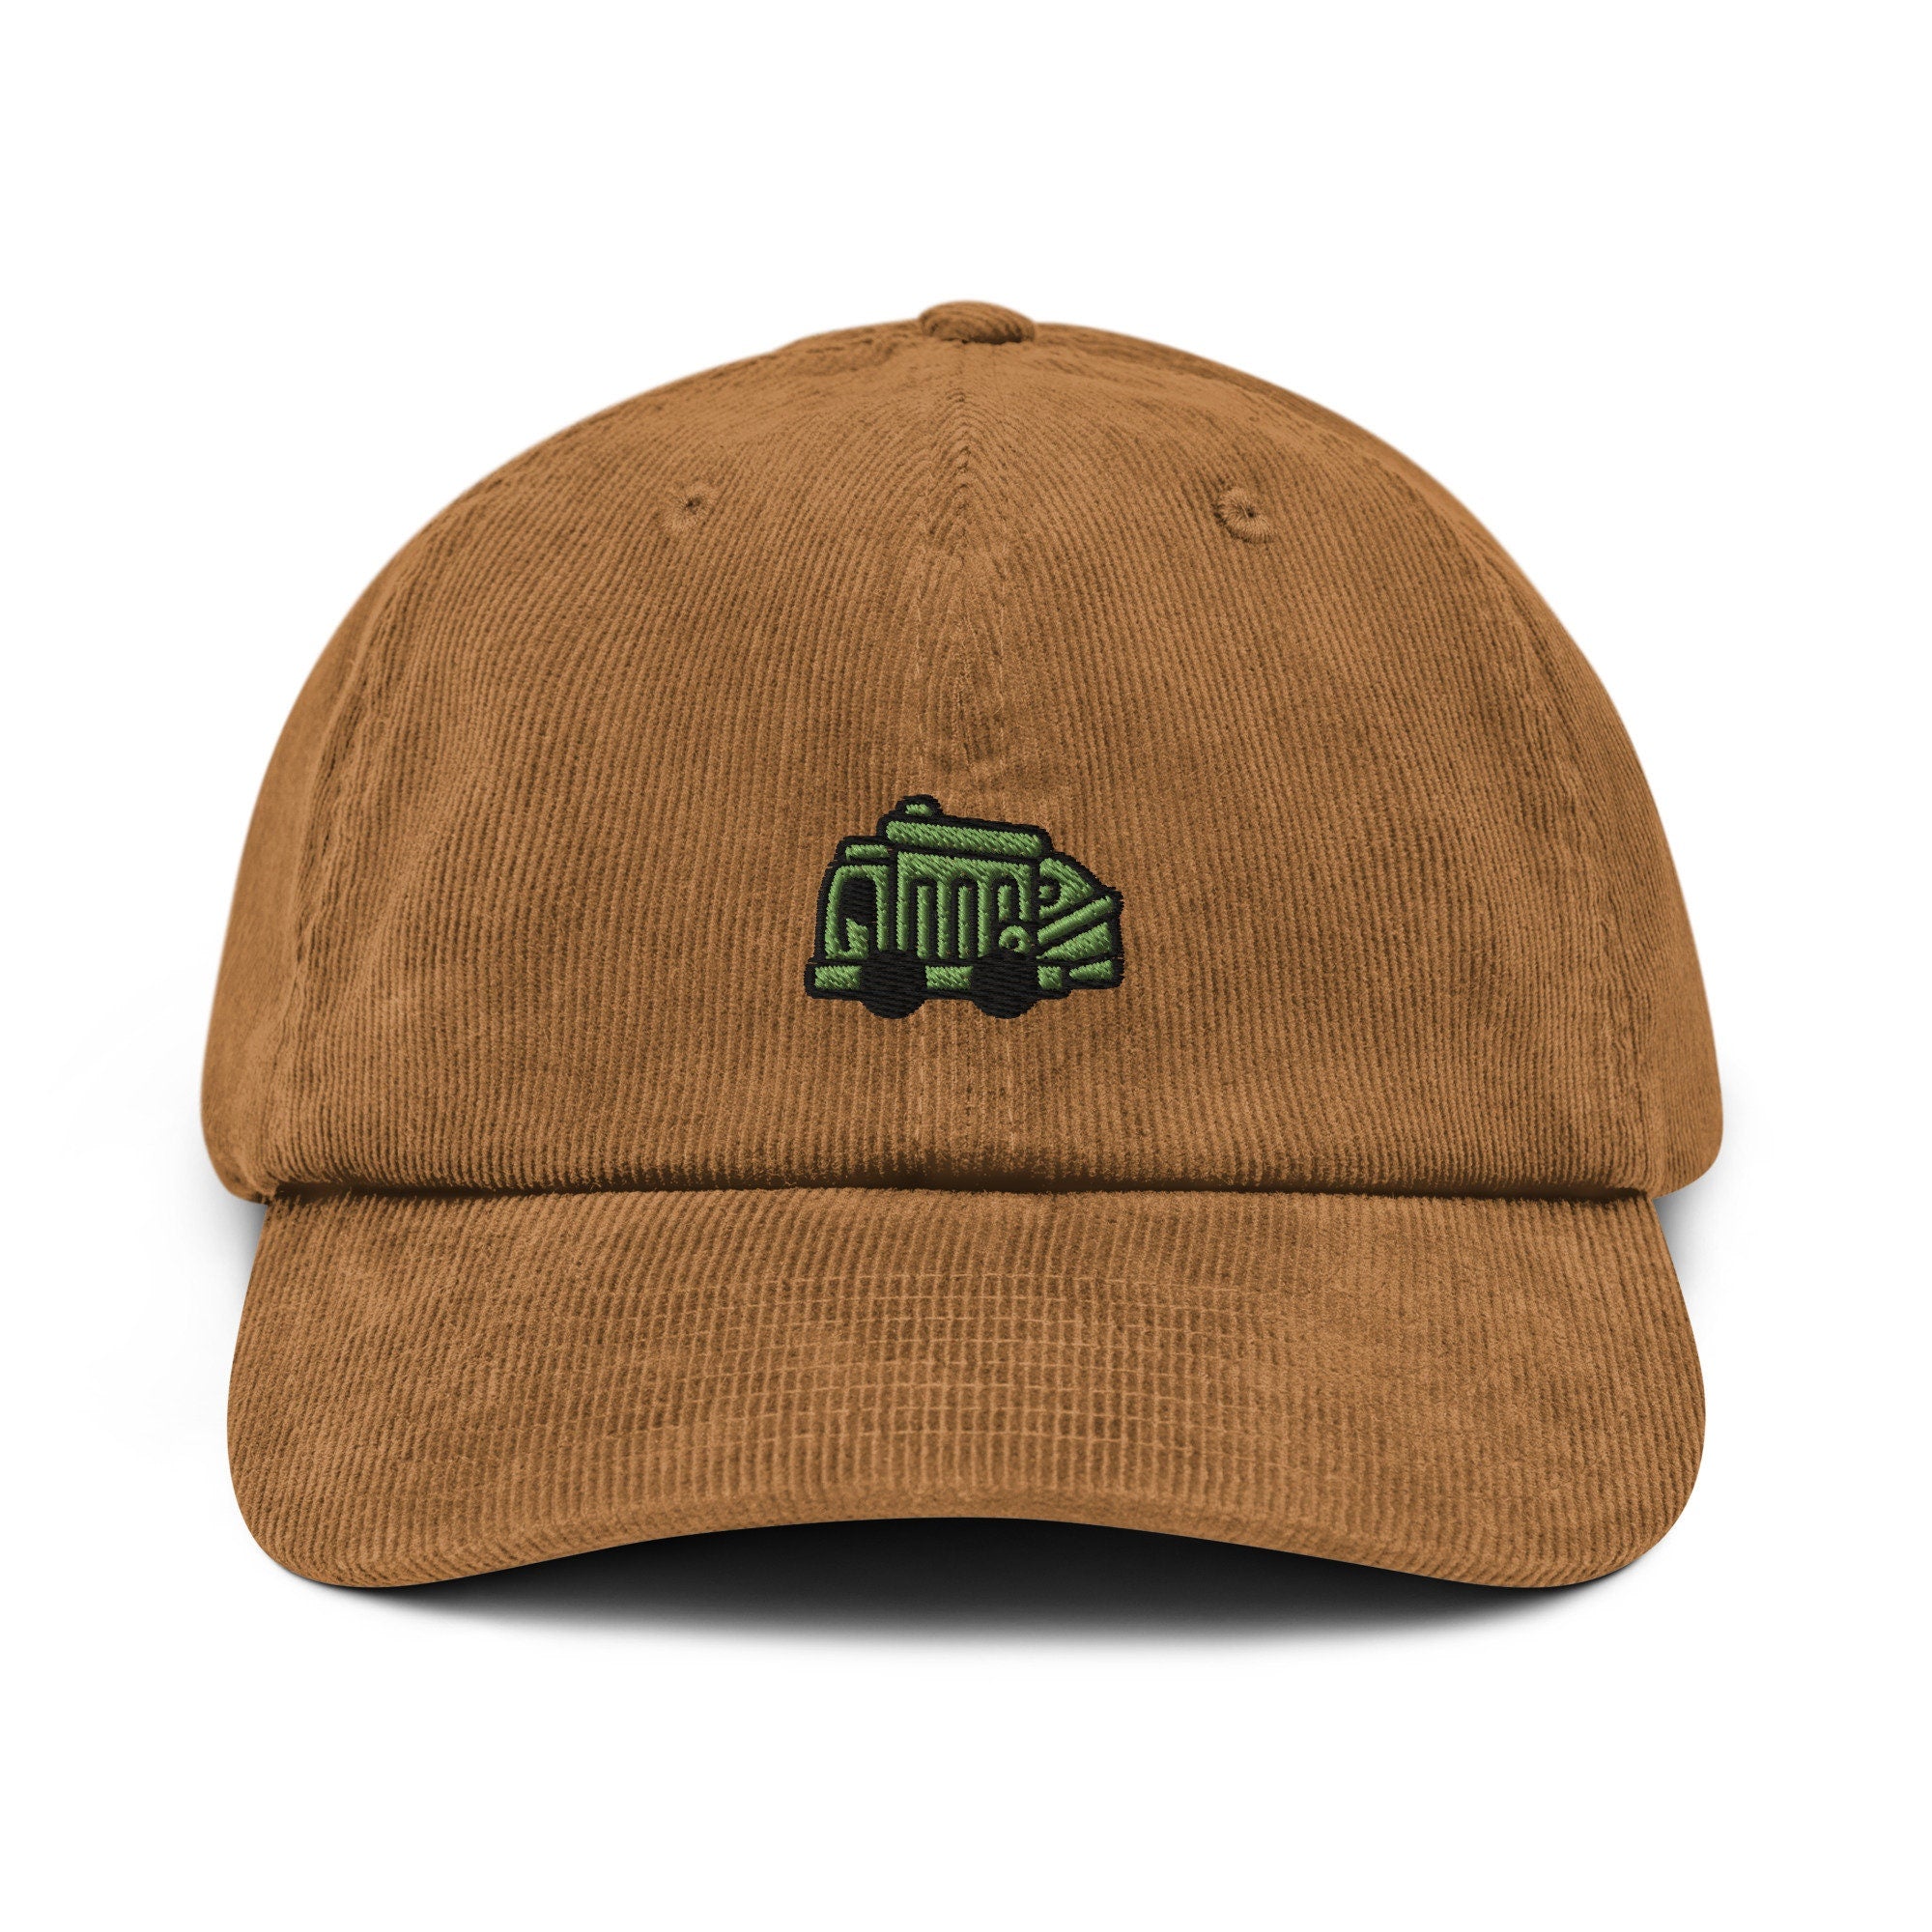 Garbage Truck Corduroy Hat, Handmade Embroidered Corduroy Dad Cap - Multiple Colors